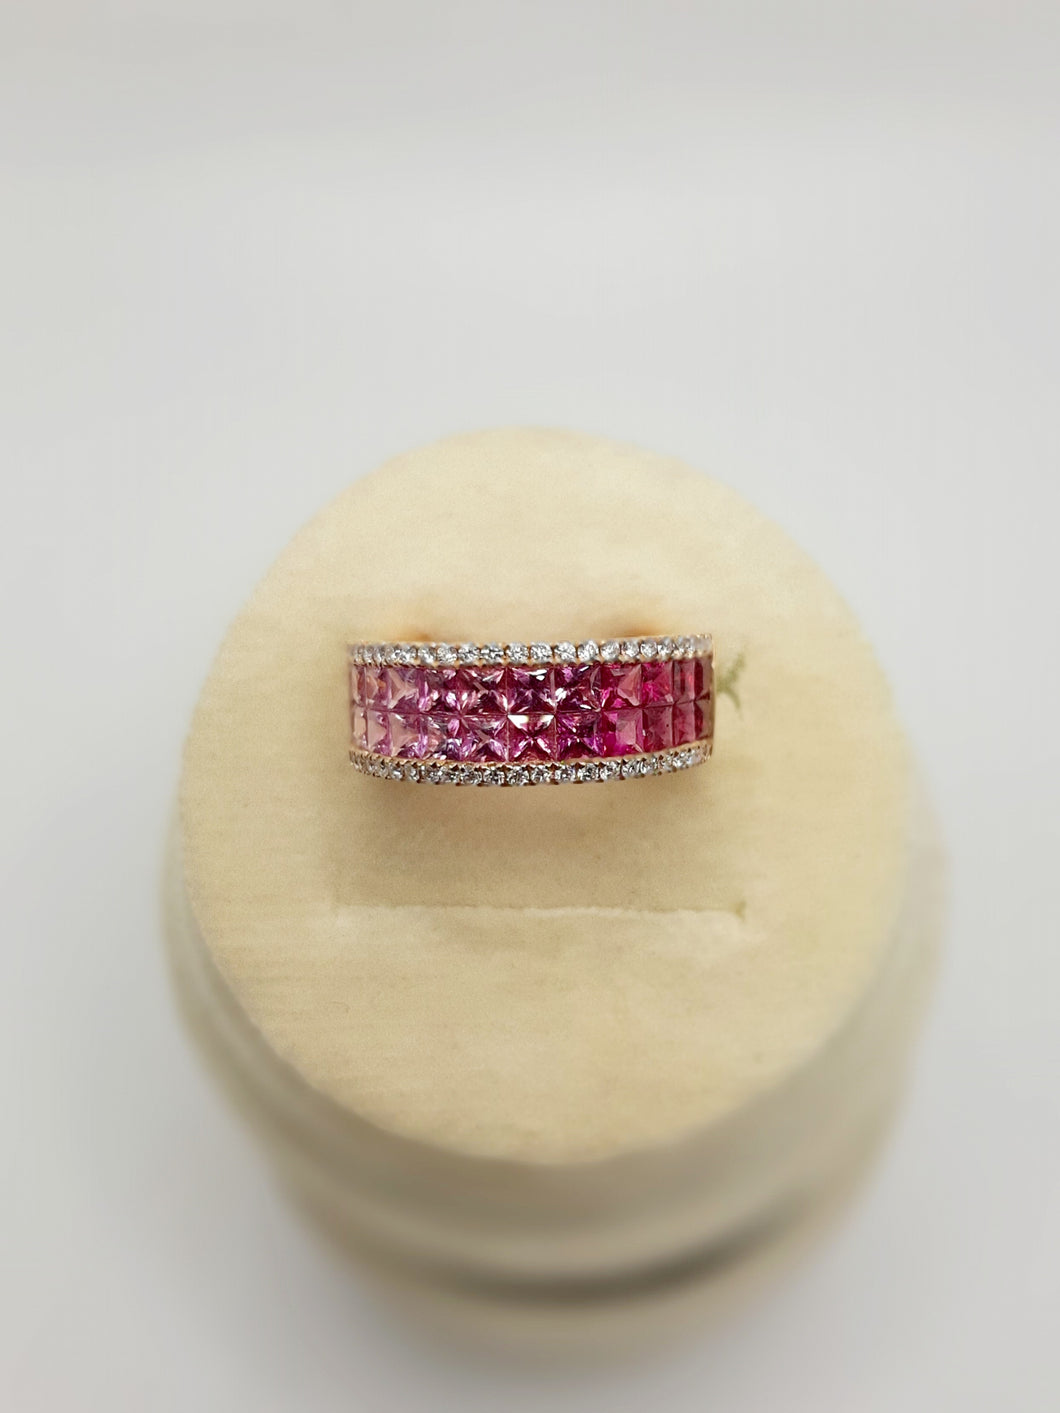 18Kt Yellow Gold Ring Featuring an Ombre' Palette of Natural Pink Sapphires